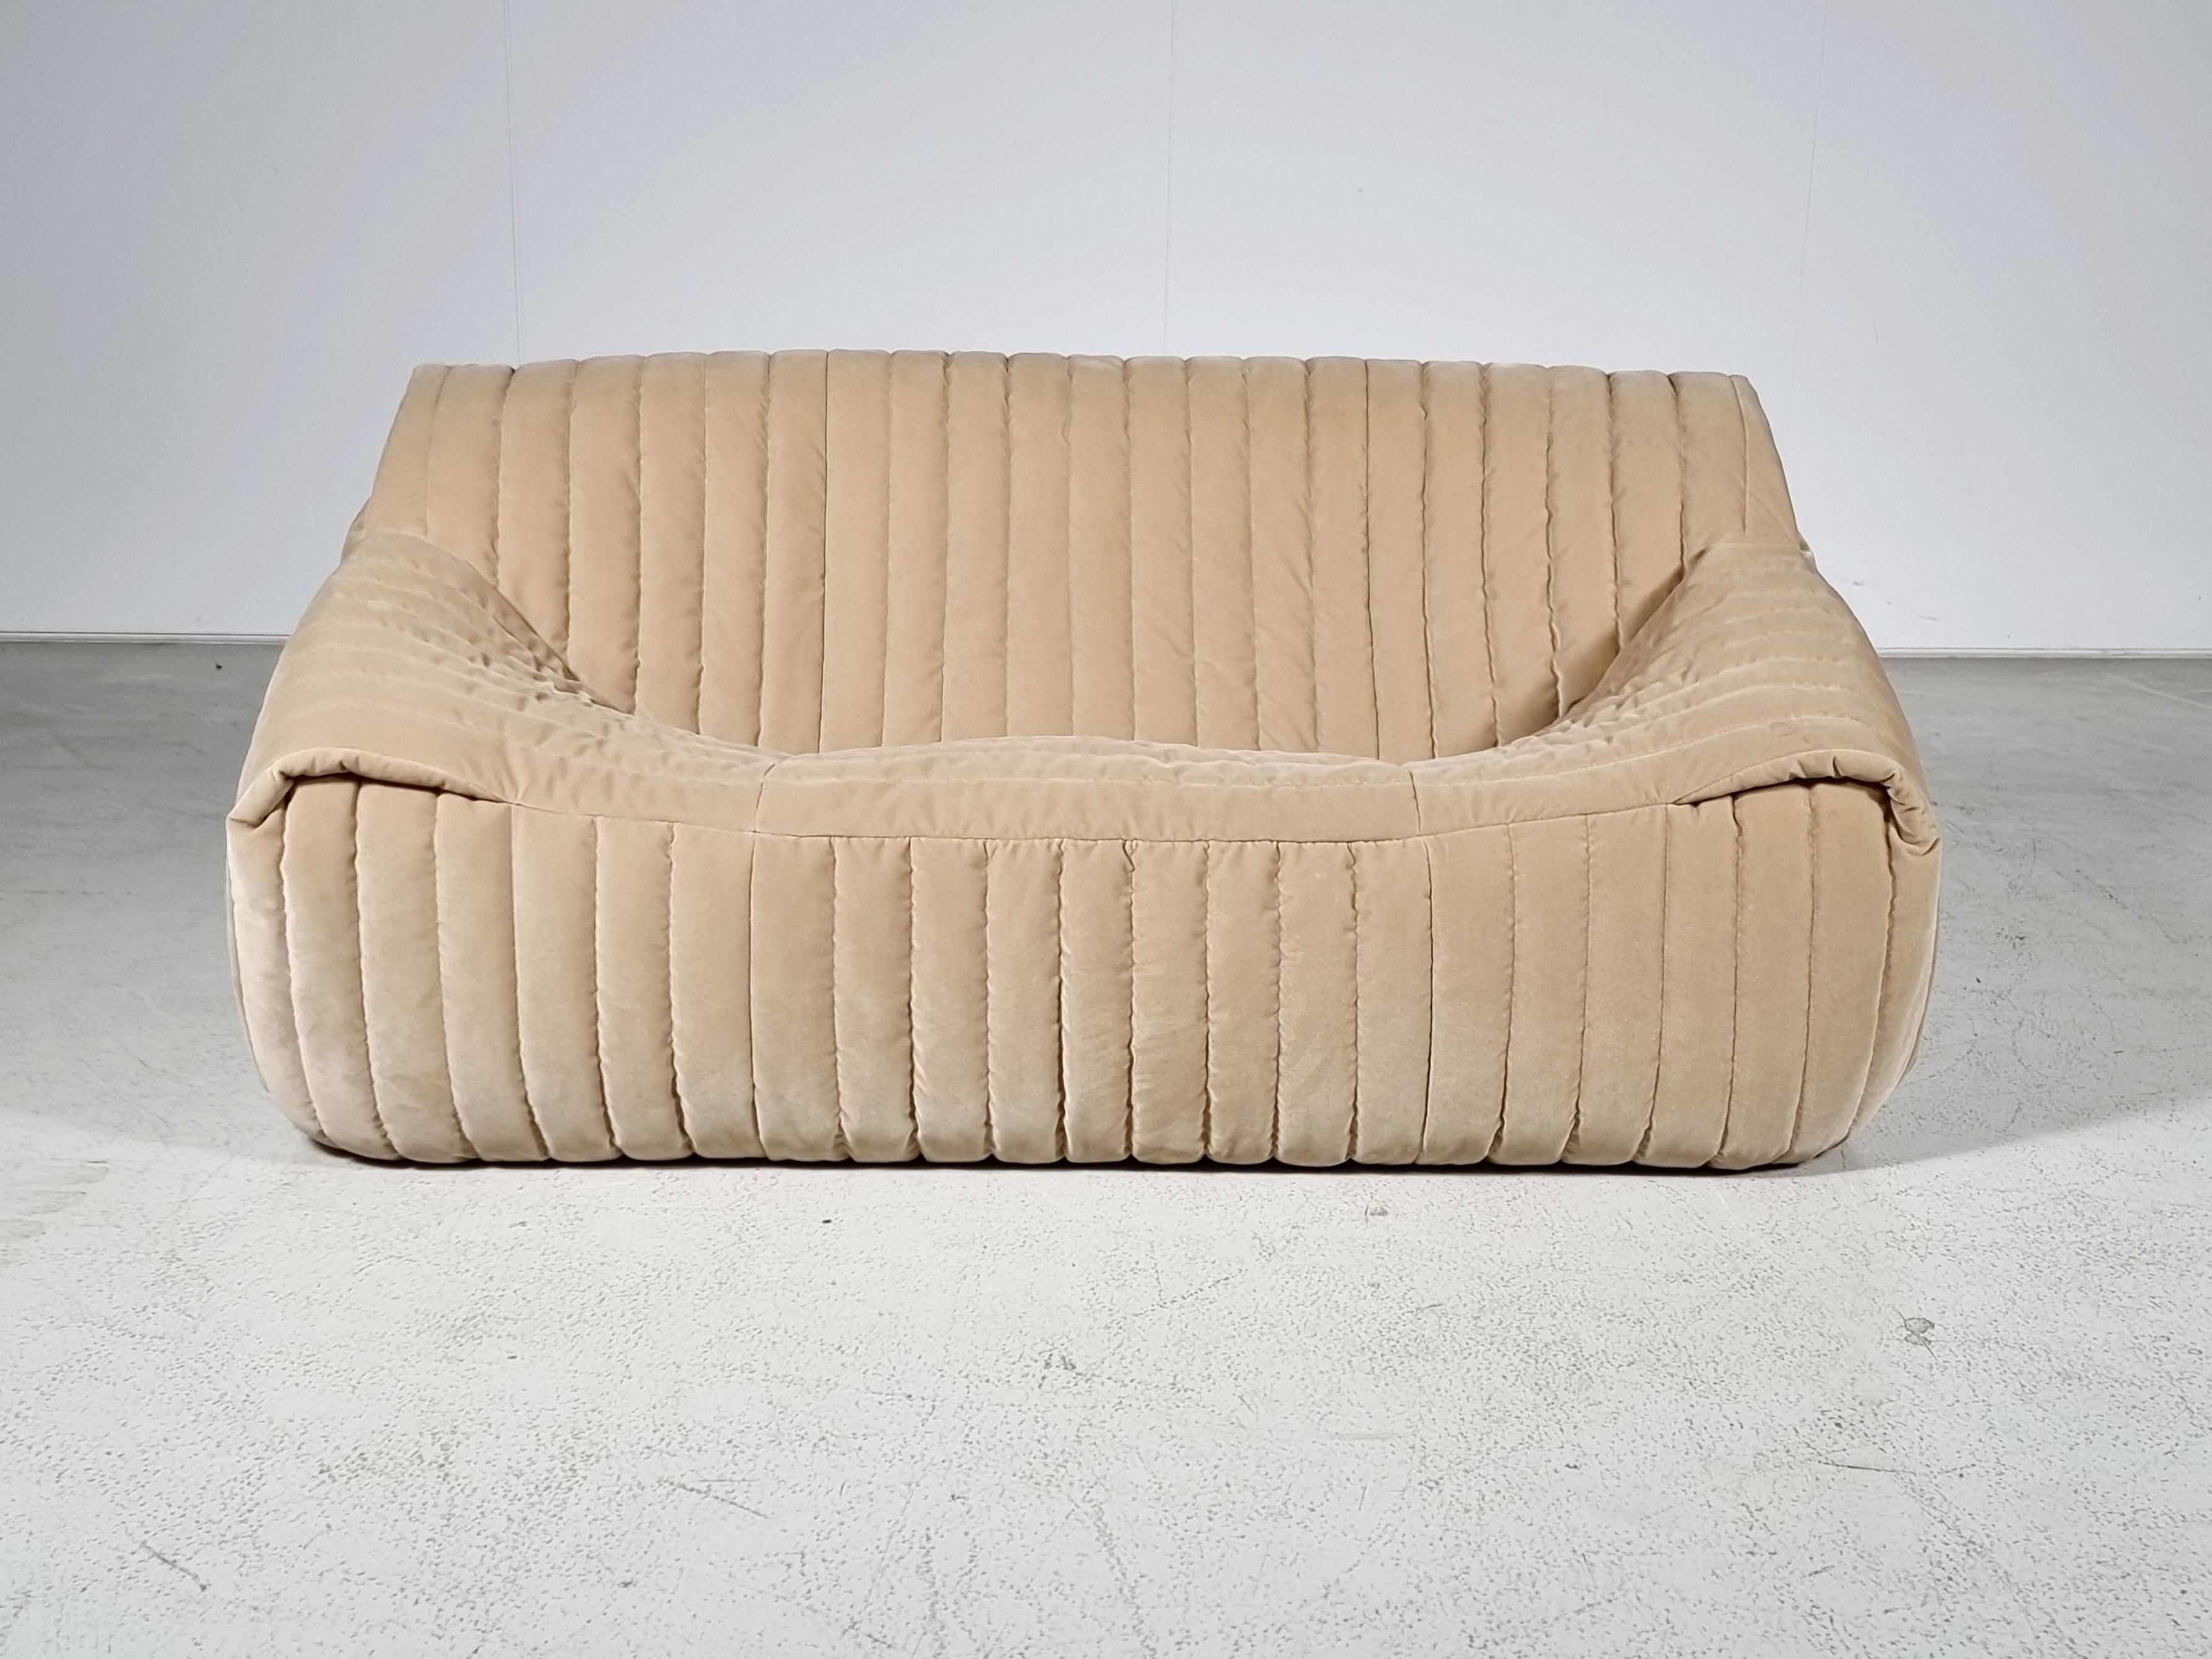 The Sandra sofa was designed by Annie Hiéronimus for Cinna after she joined the Roset Bureau d'Etudes in 1976.

Constructed fully from foam, the sofa has a solid form. Reupholstered in a beige velvet fabric. It's extremely comfortable. 


